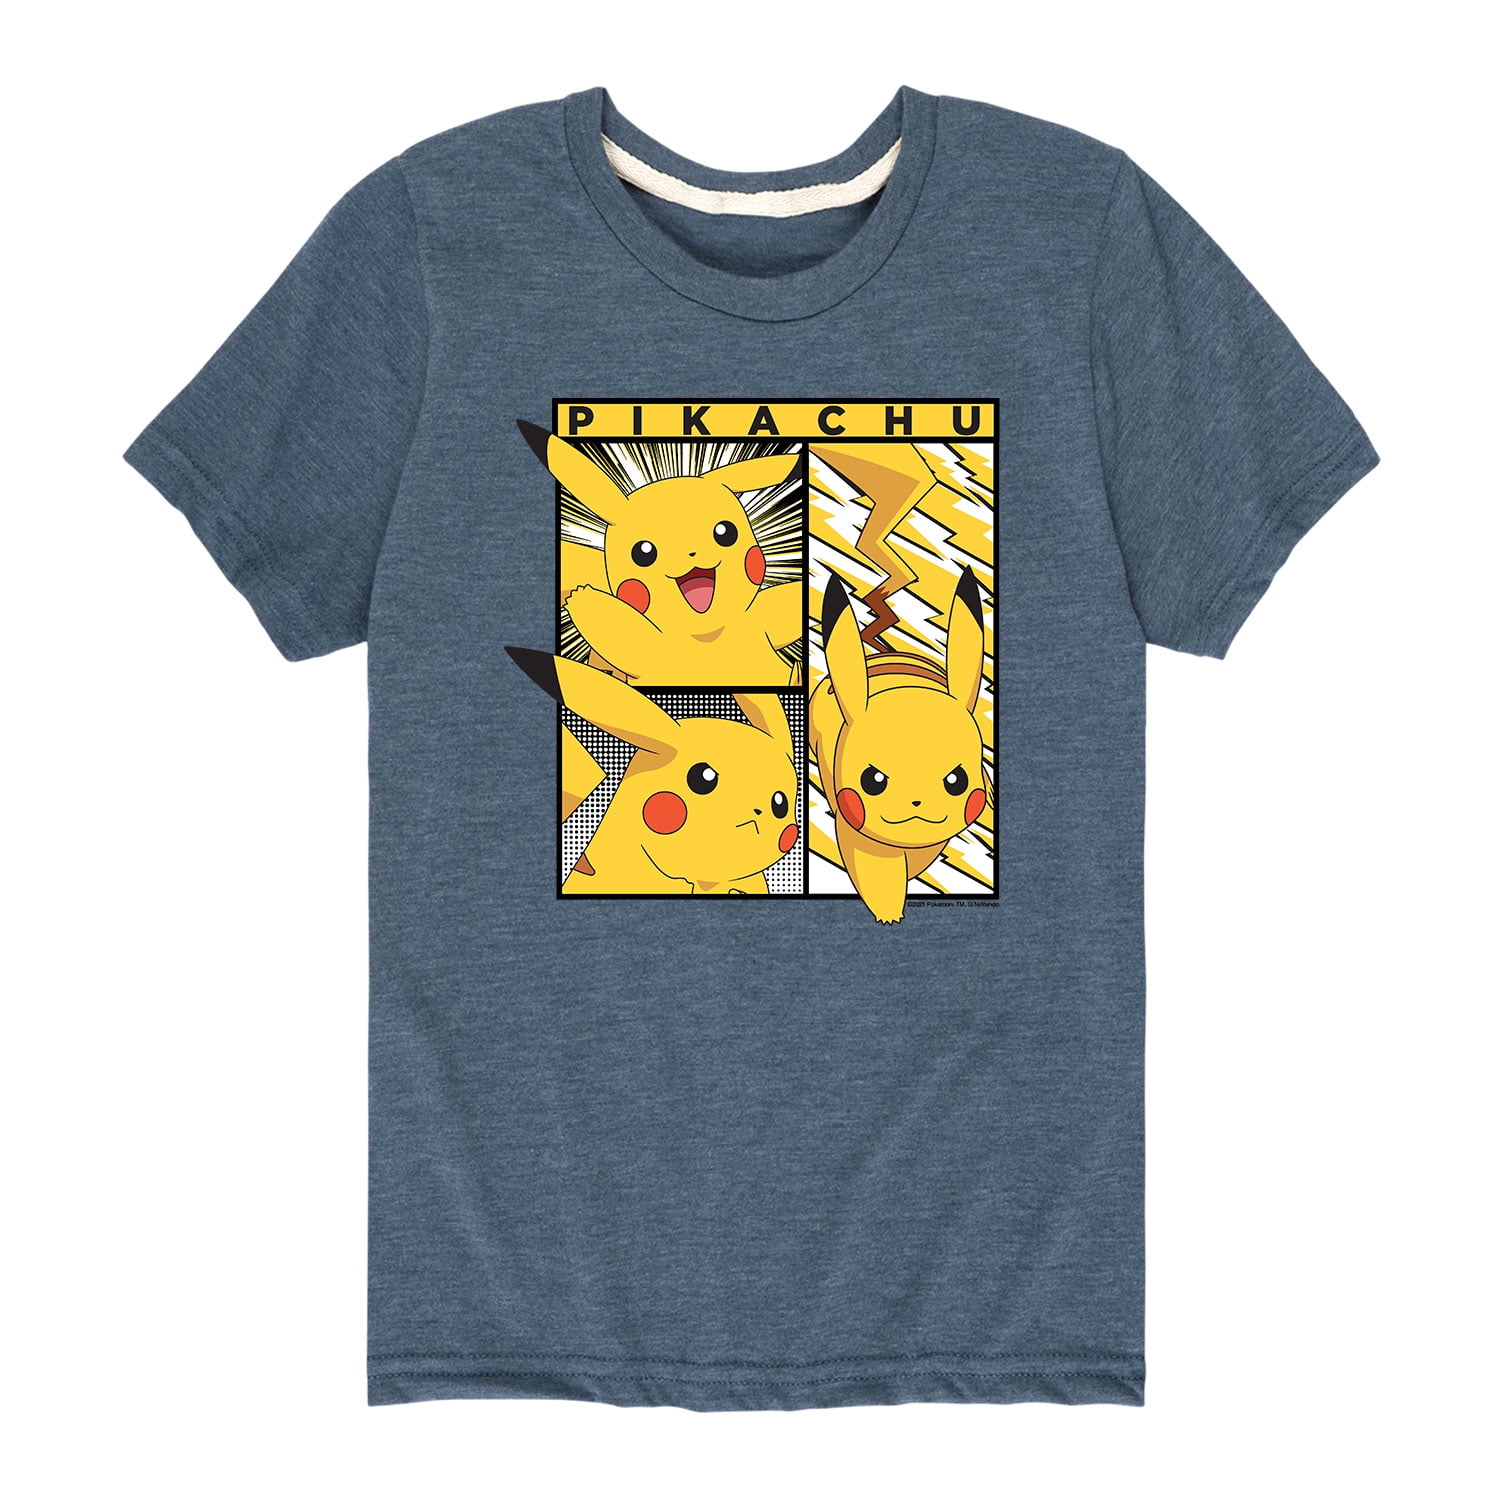 Official Kids Pokemon All Over Print Sublimated T-Shirt Boys Girls Pikachu